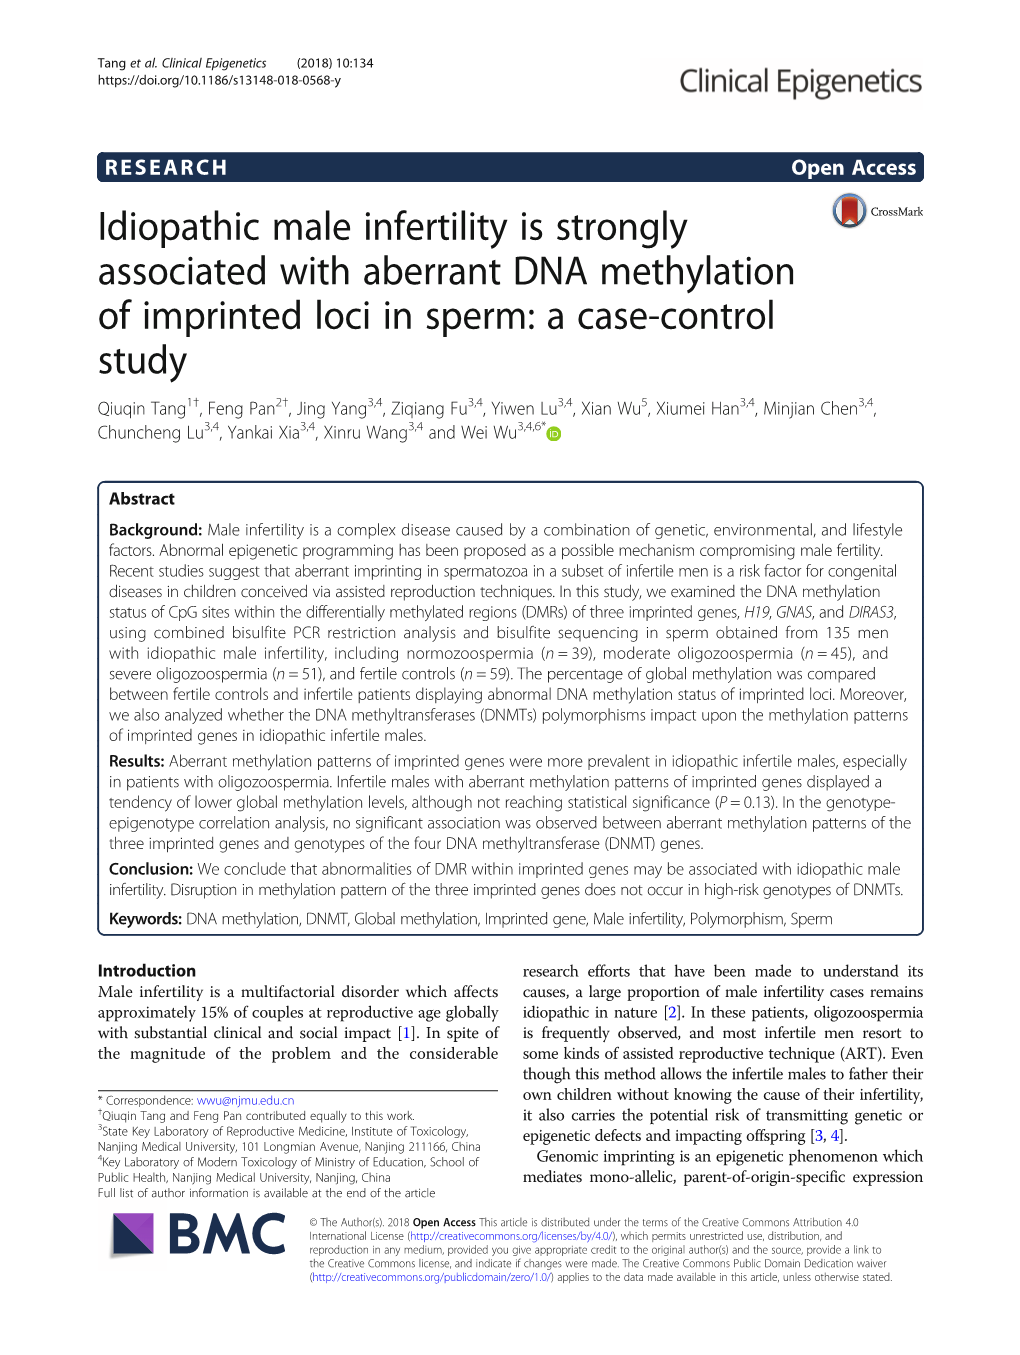 Idiopathic Male Infertility Is Strongly Associated